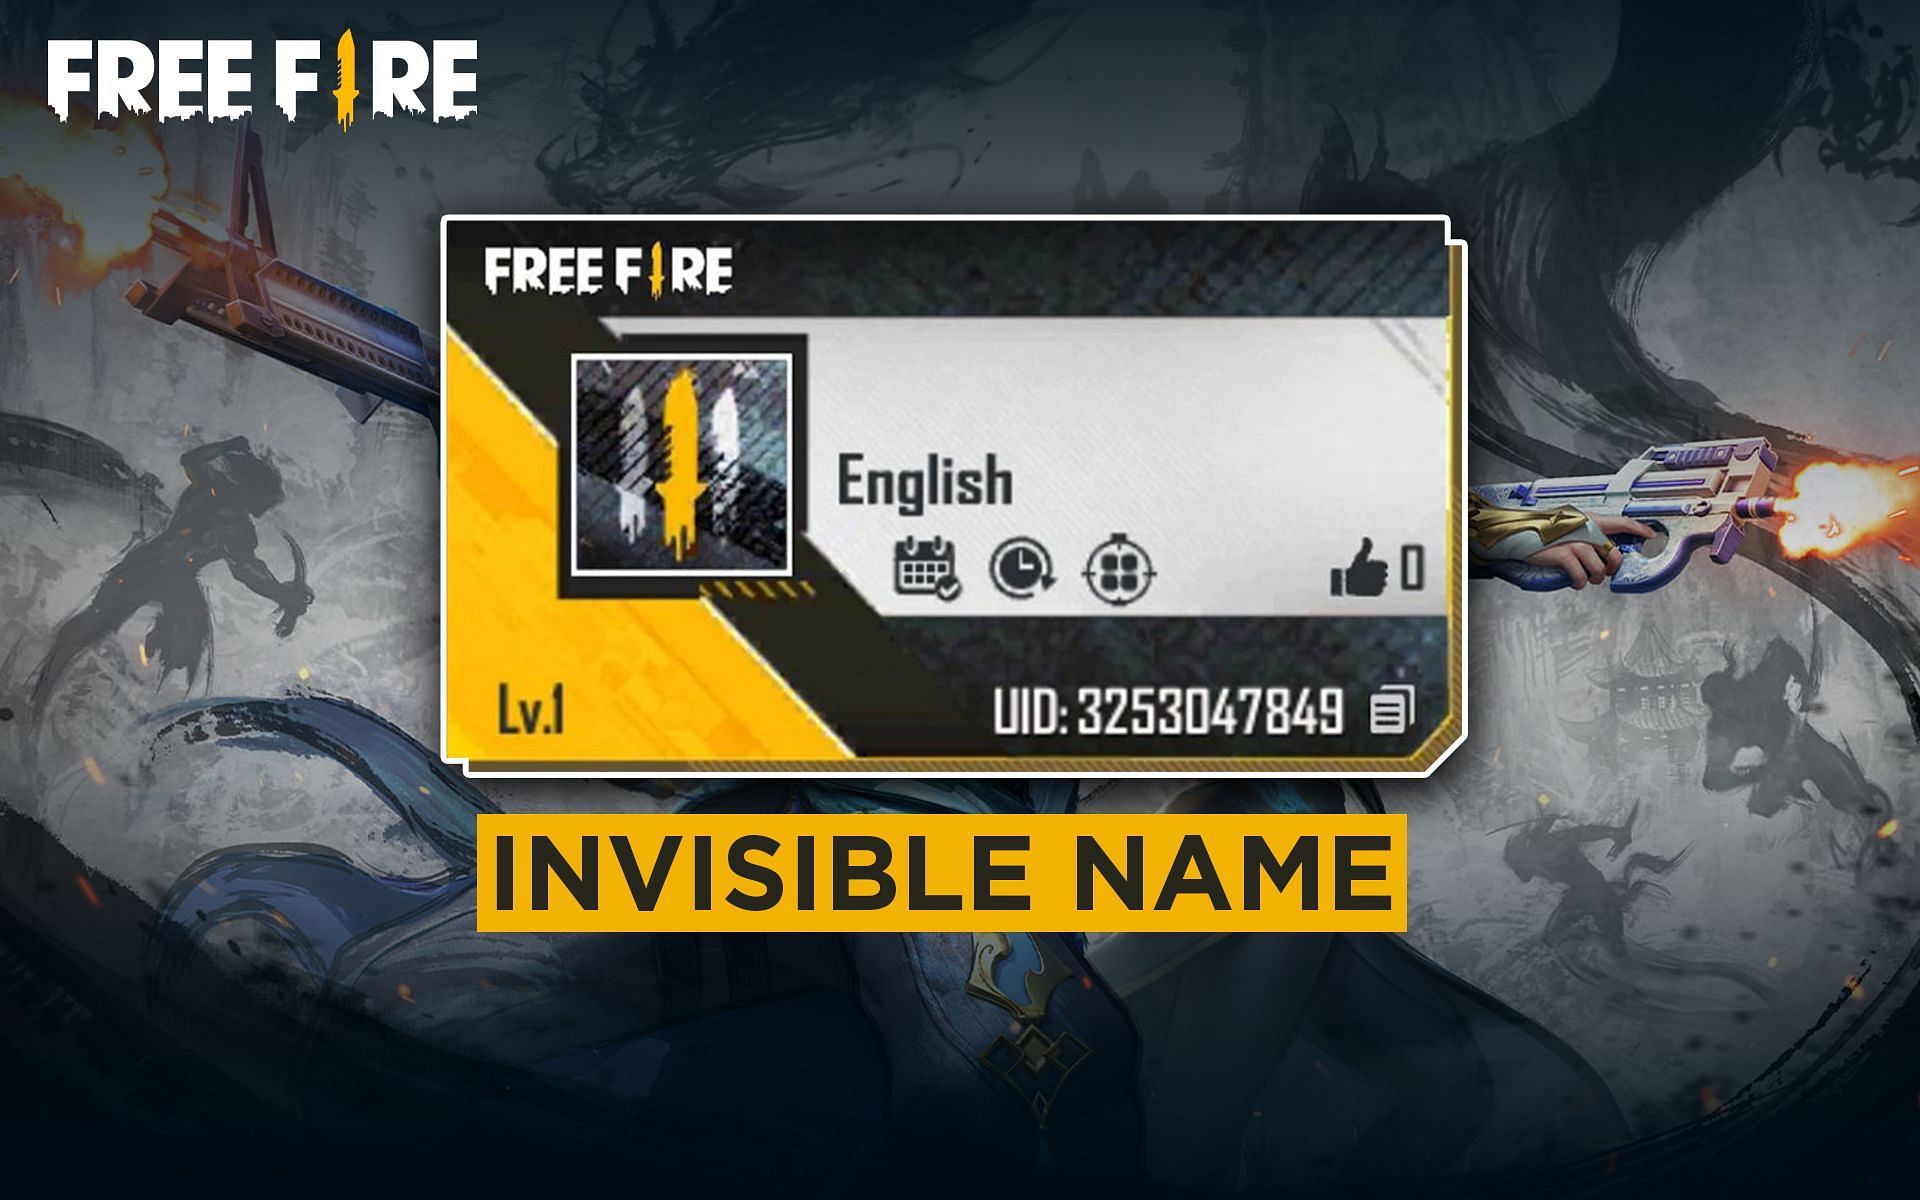 Gamers can use invisible names for a unique look in Free Fire (Image via Sportskeeda)